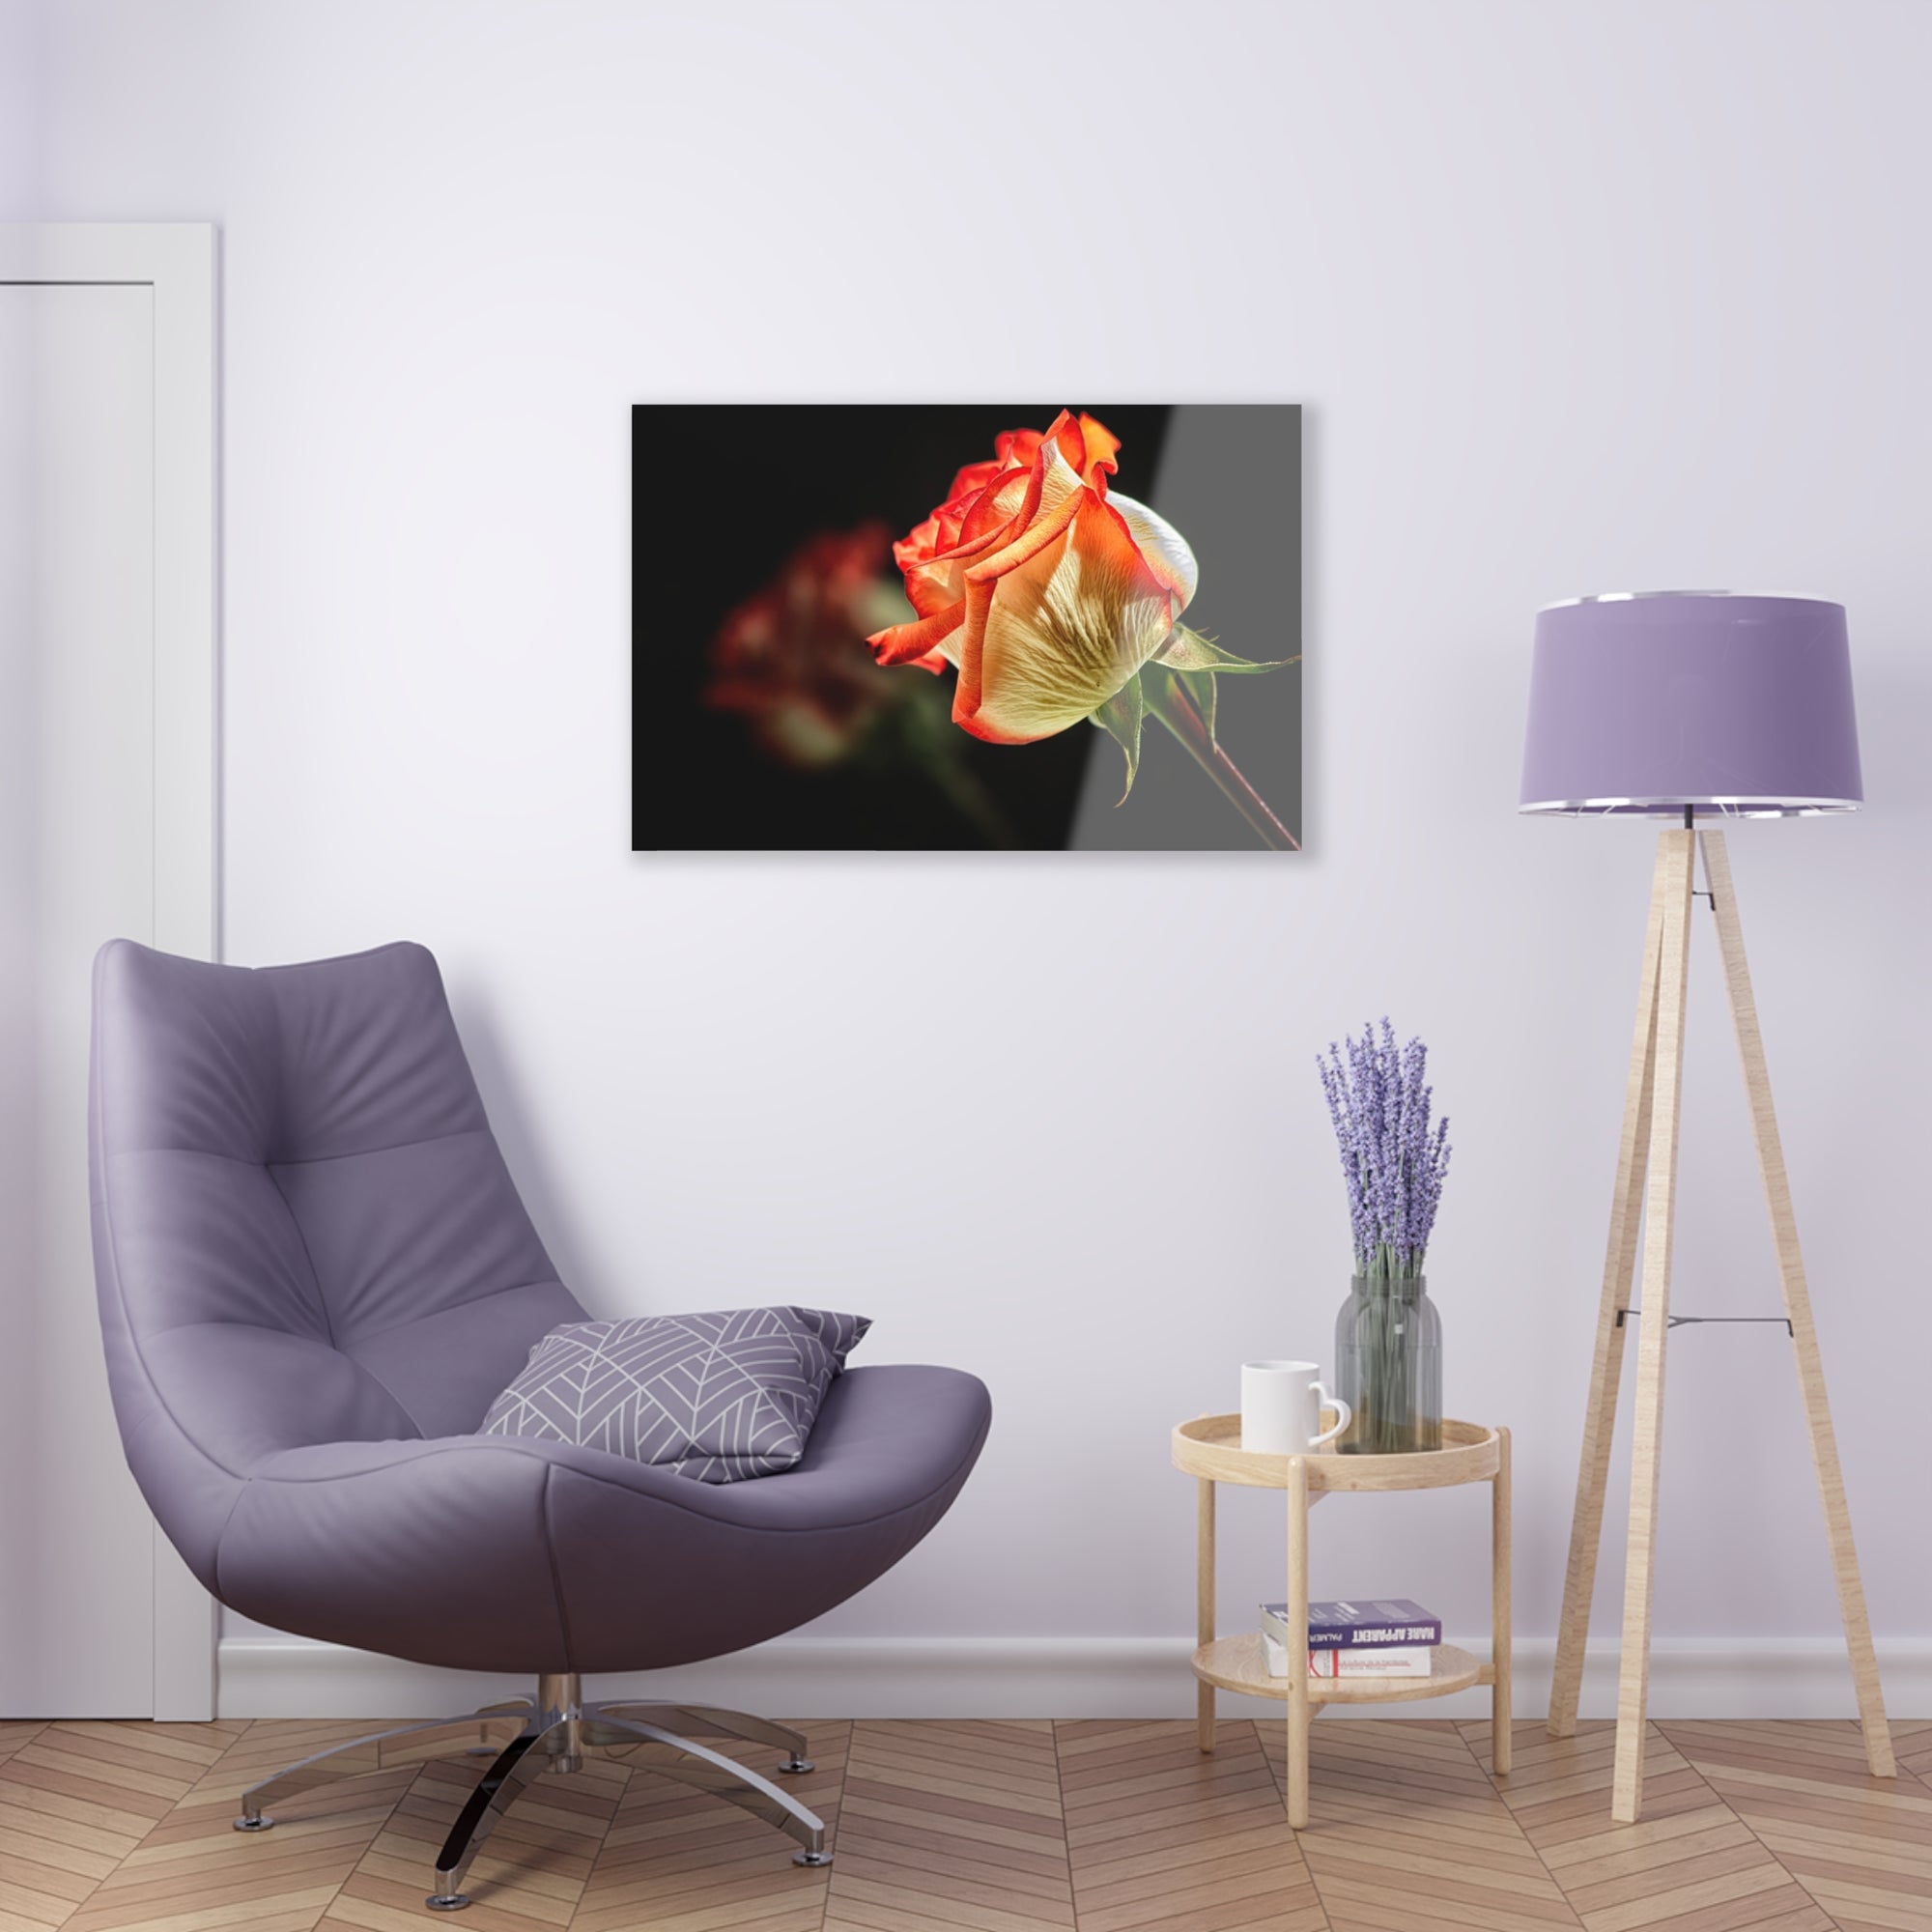 Rosey Red Reflections Acrylic Print